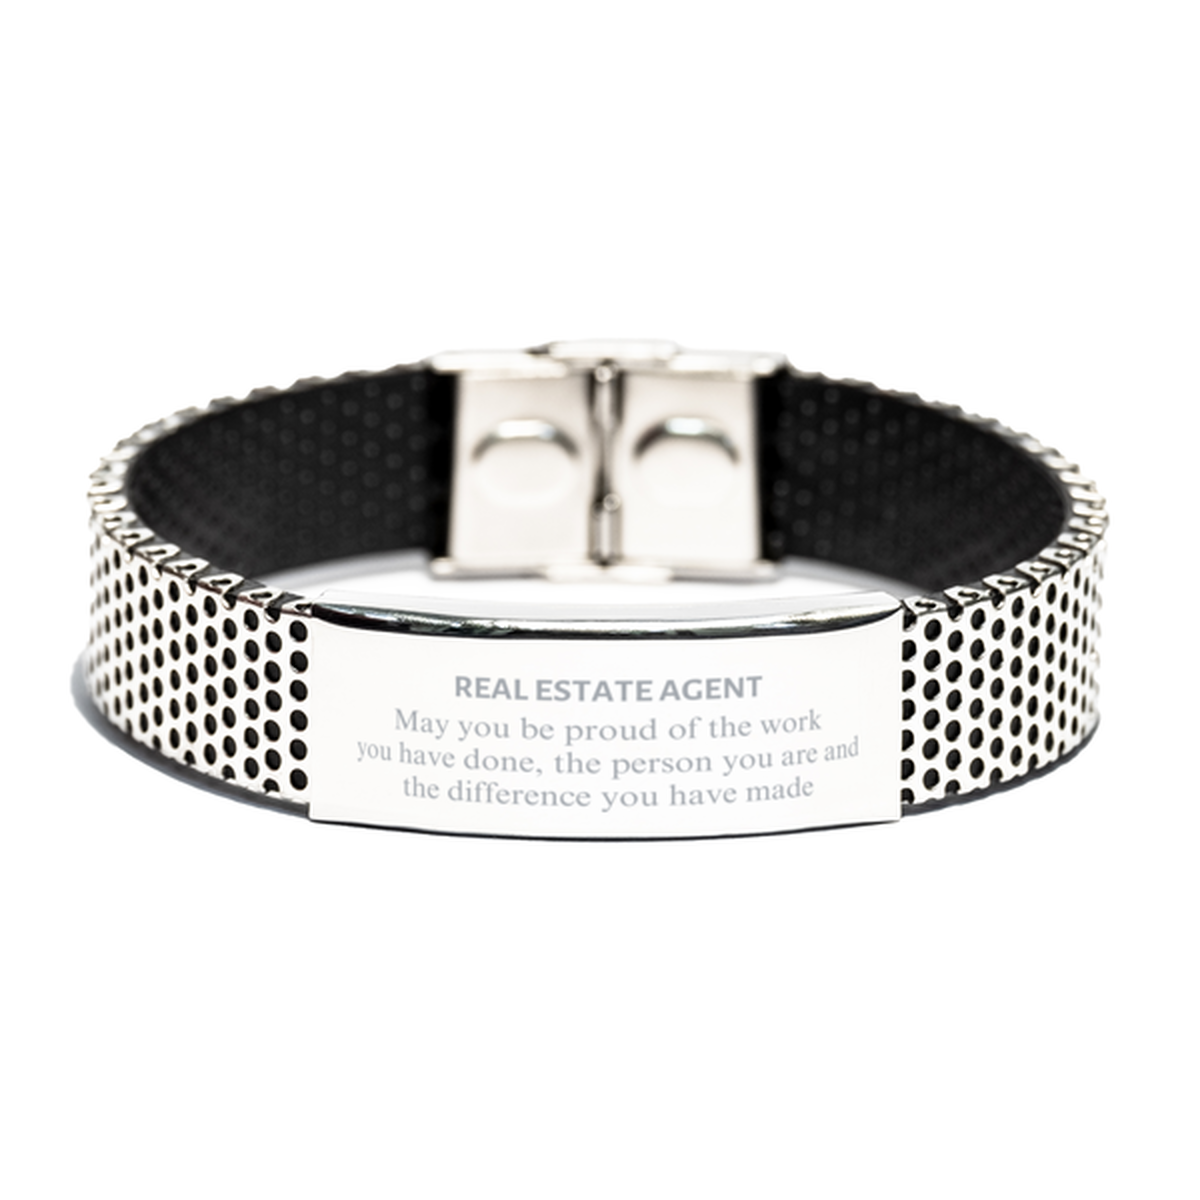 Real Estate Agent May you be proud of the work you have done, Retirement Real Estate Agent Stainless Steel Bracelet for Colleague Appreciation Gifts Amazing for Real Estate Agent